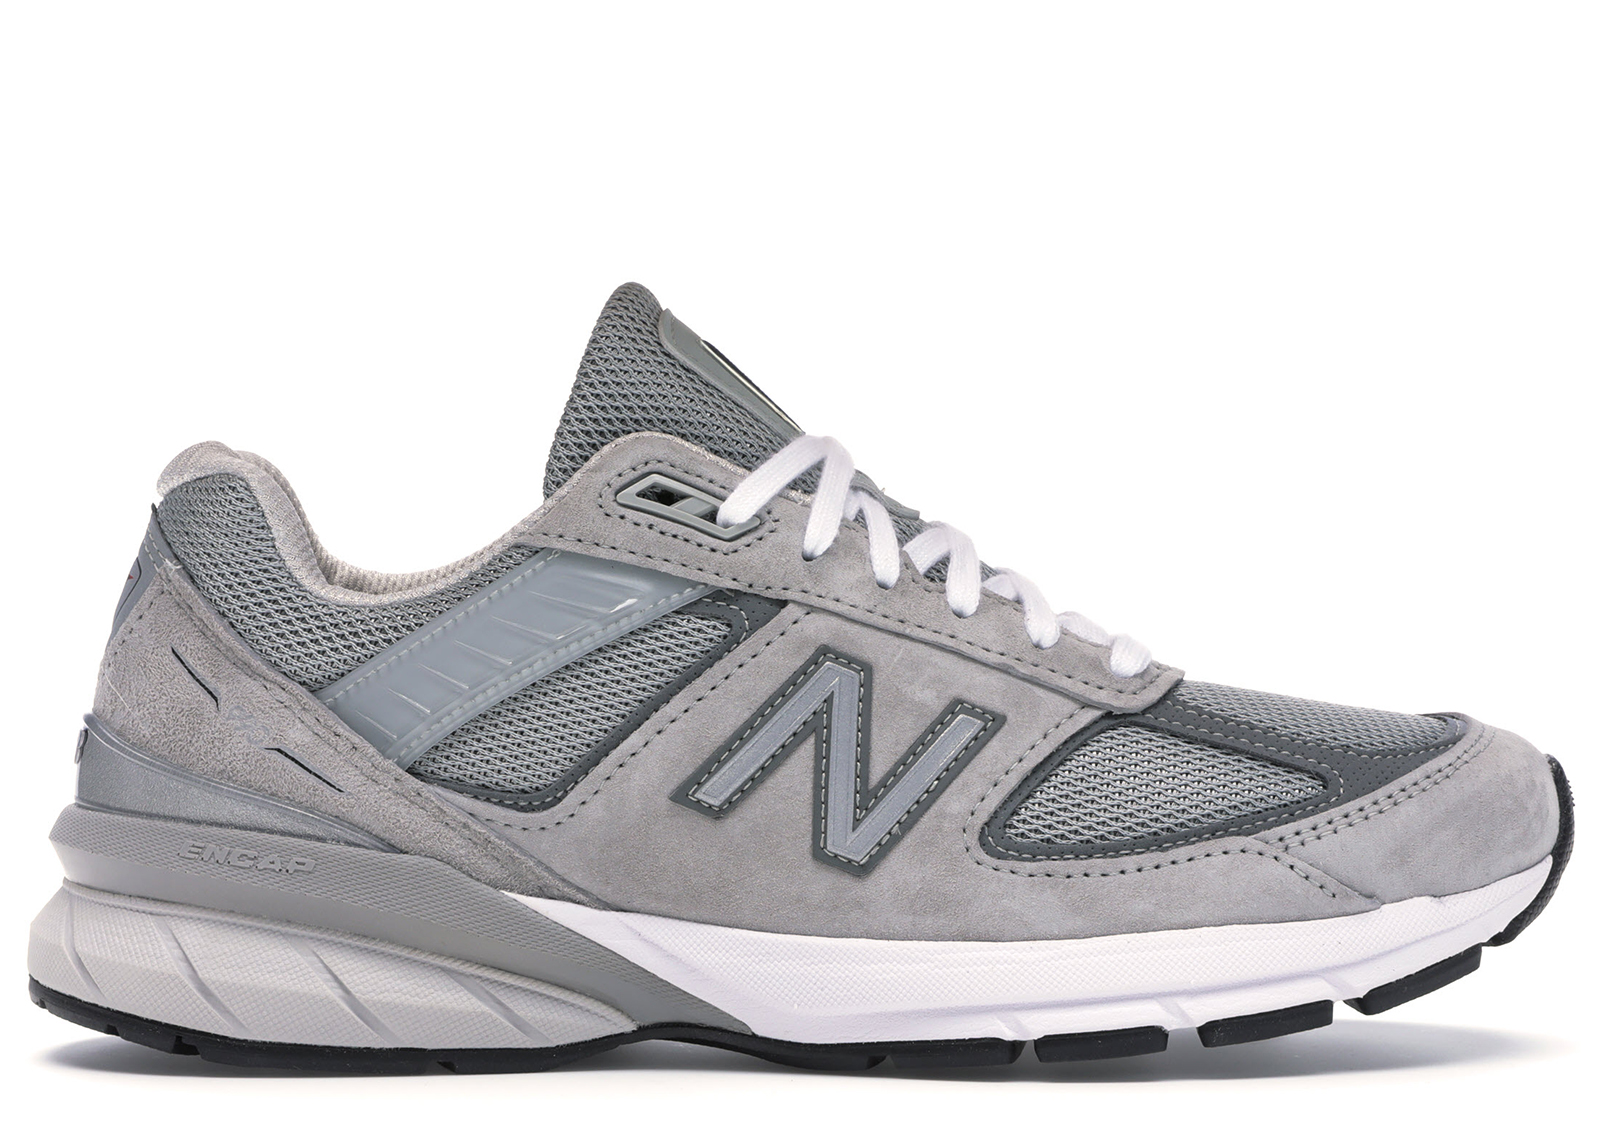 New Balance Size 7.5 Shoes - Most Popular